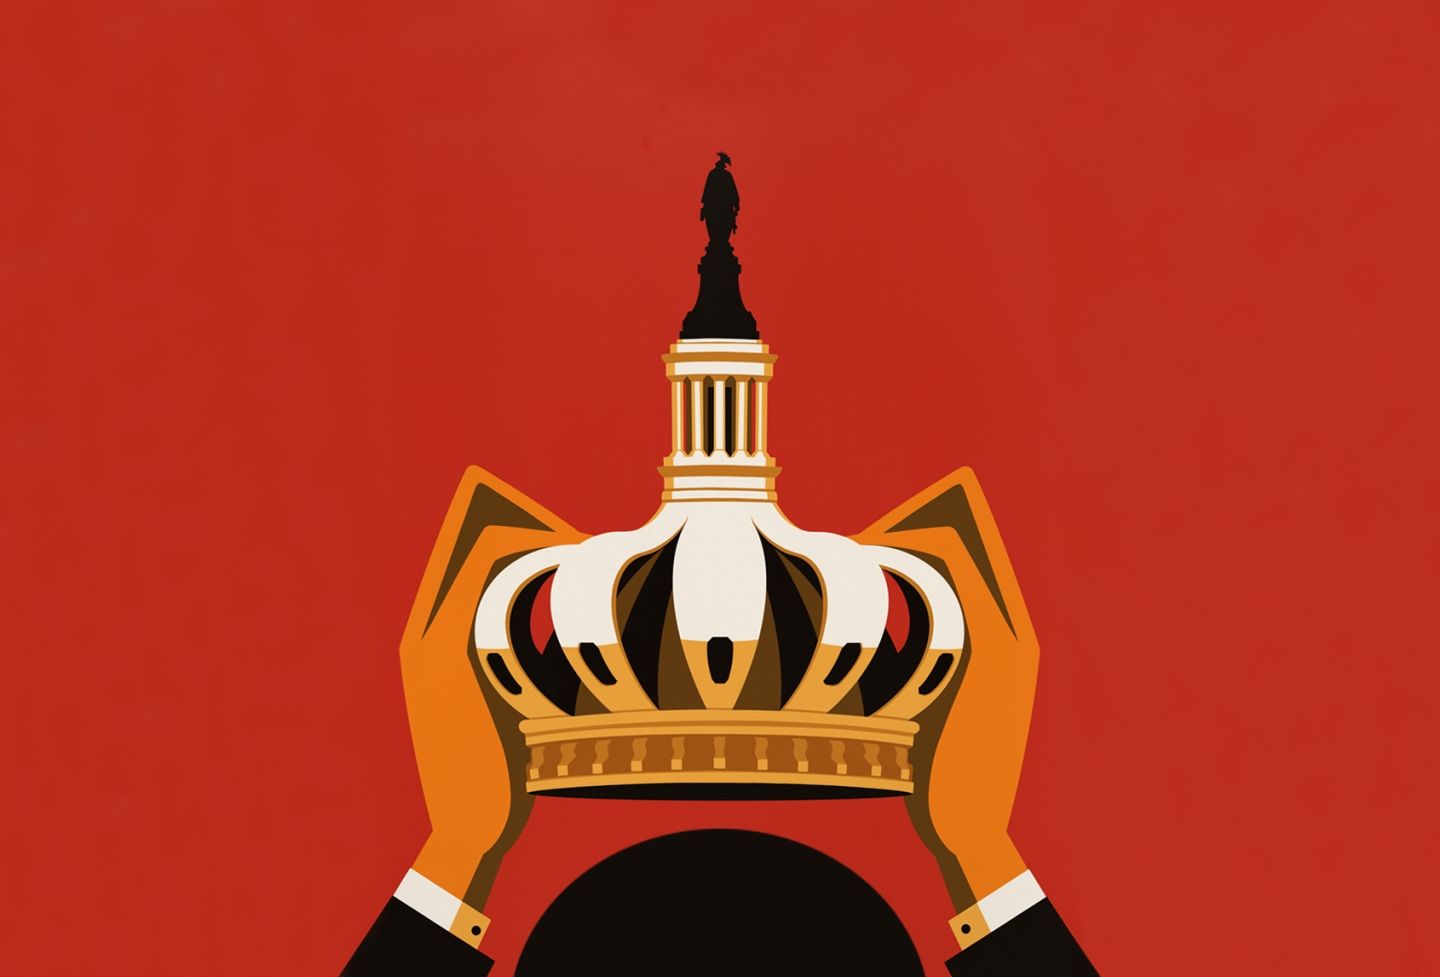 Illustration of a crown shaped like Capitol architecture